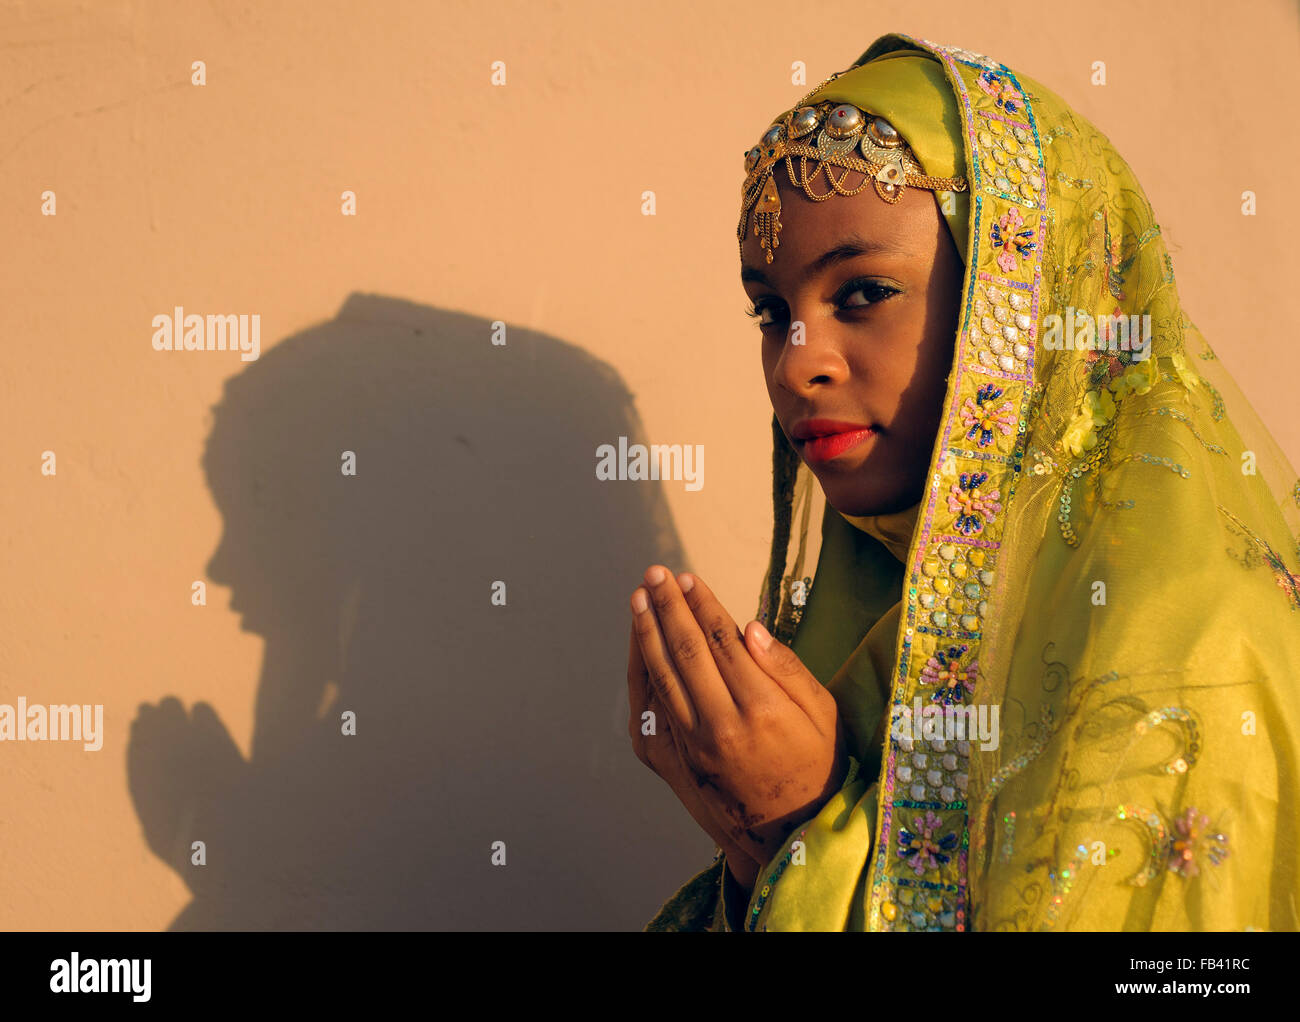 Young girl in traditional costume, Oman Stock Photo